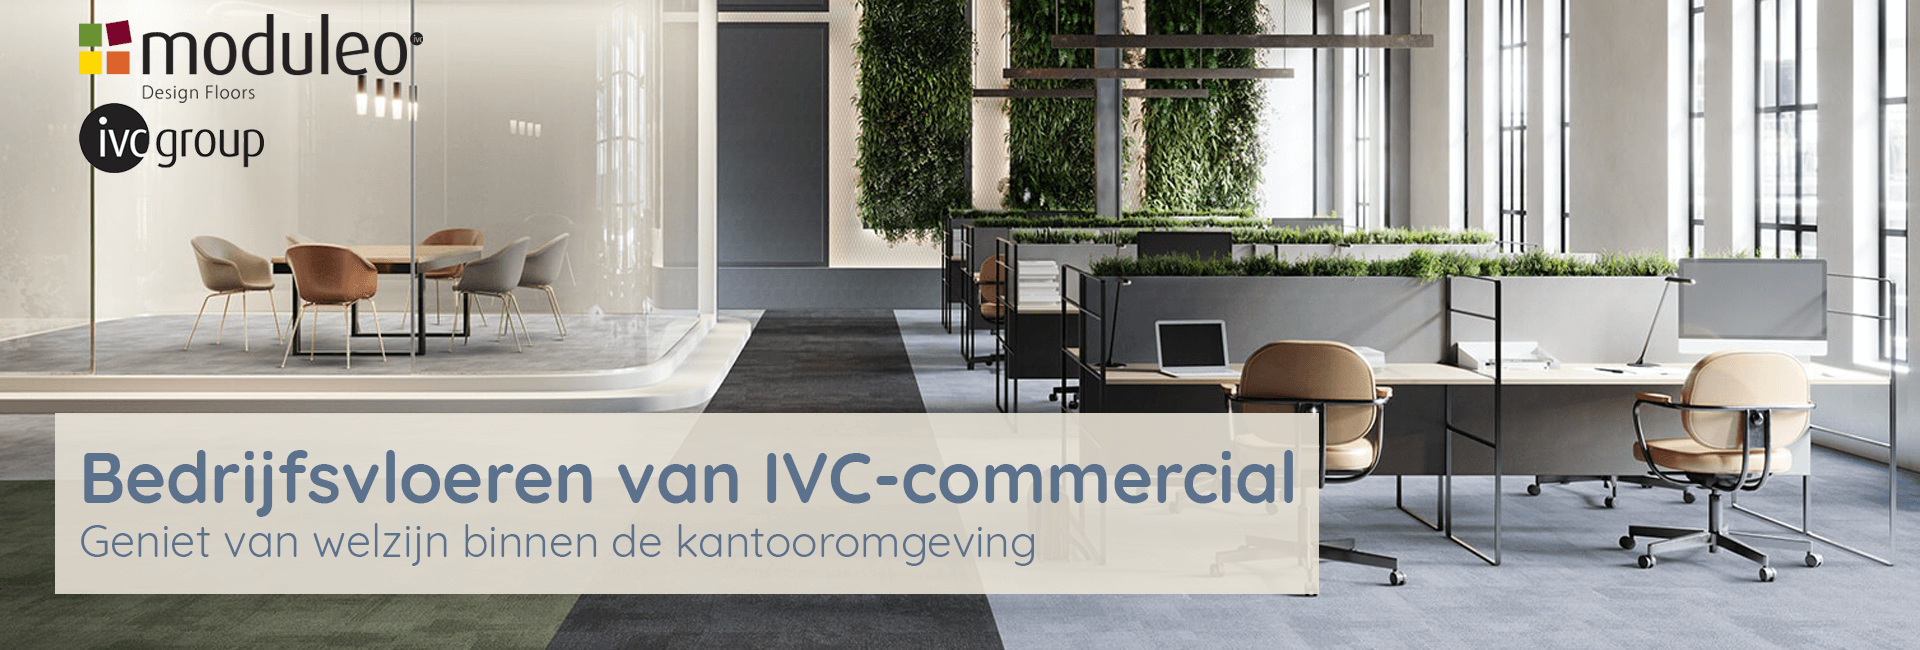 IVC-commercial